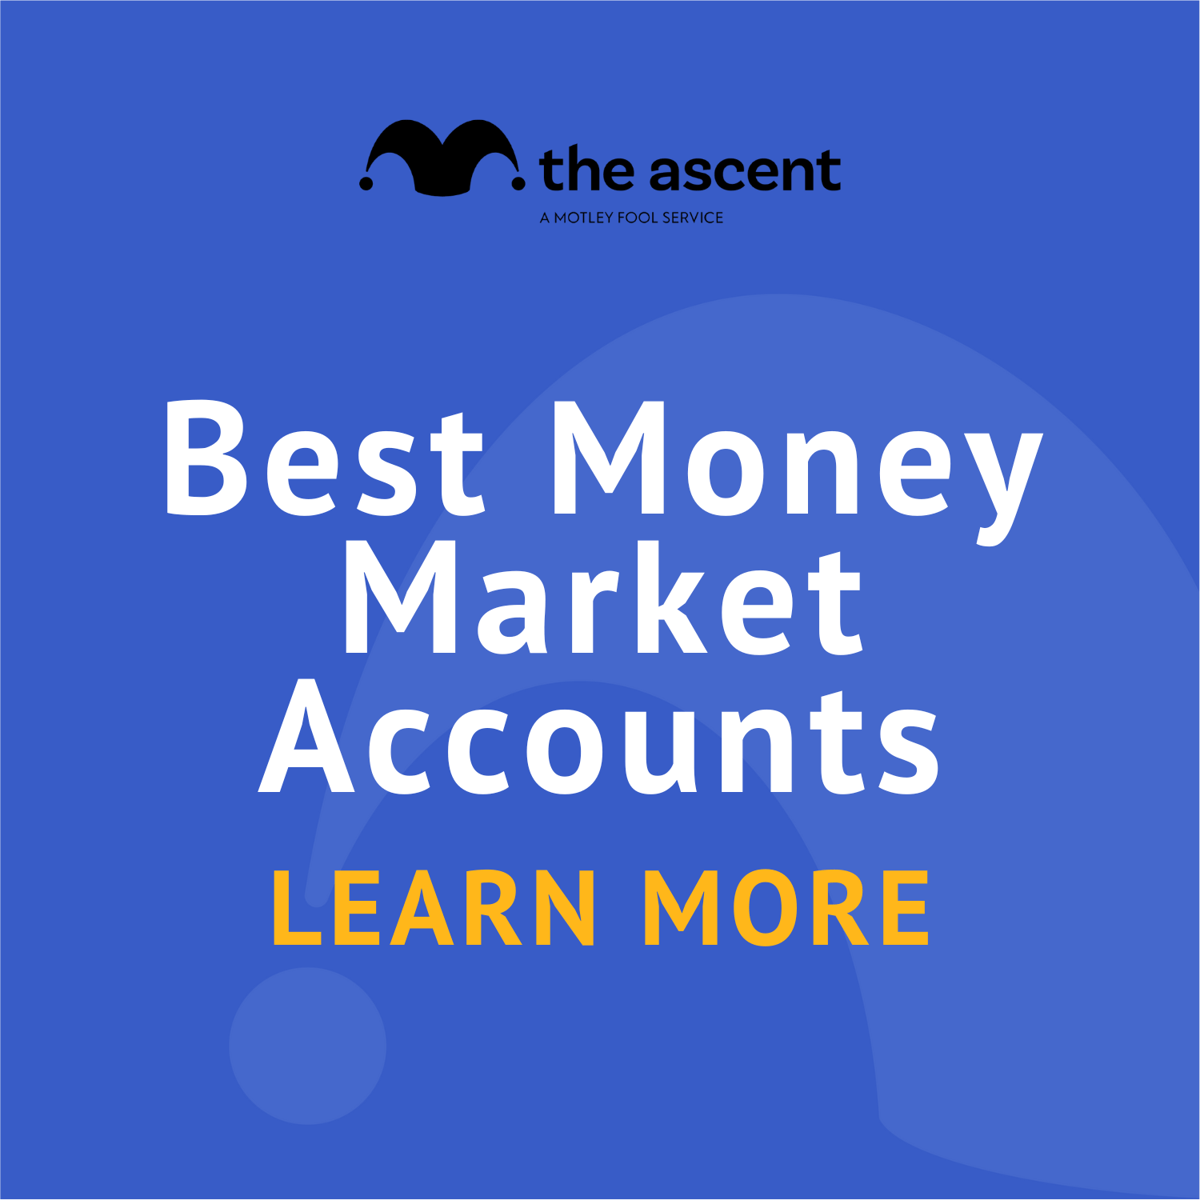 New Jumbo Money Market Account: Earn More Without Losing